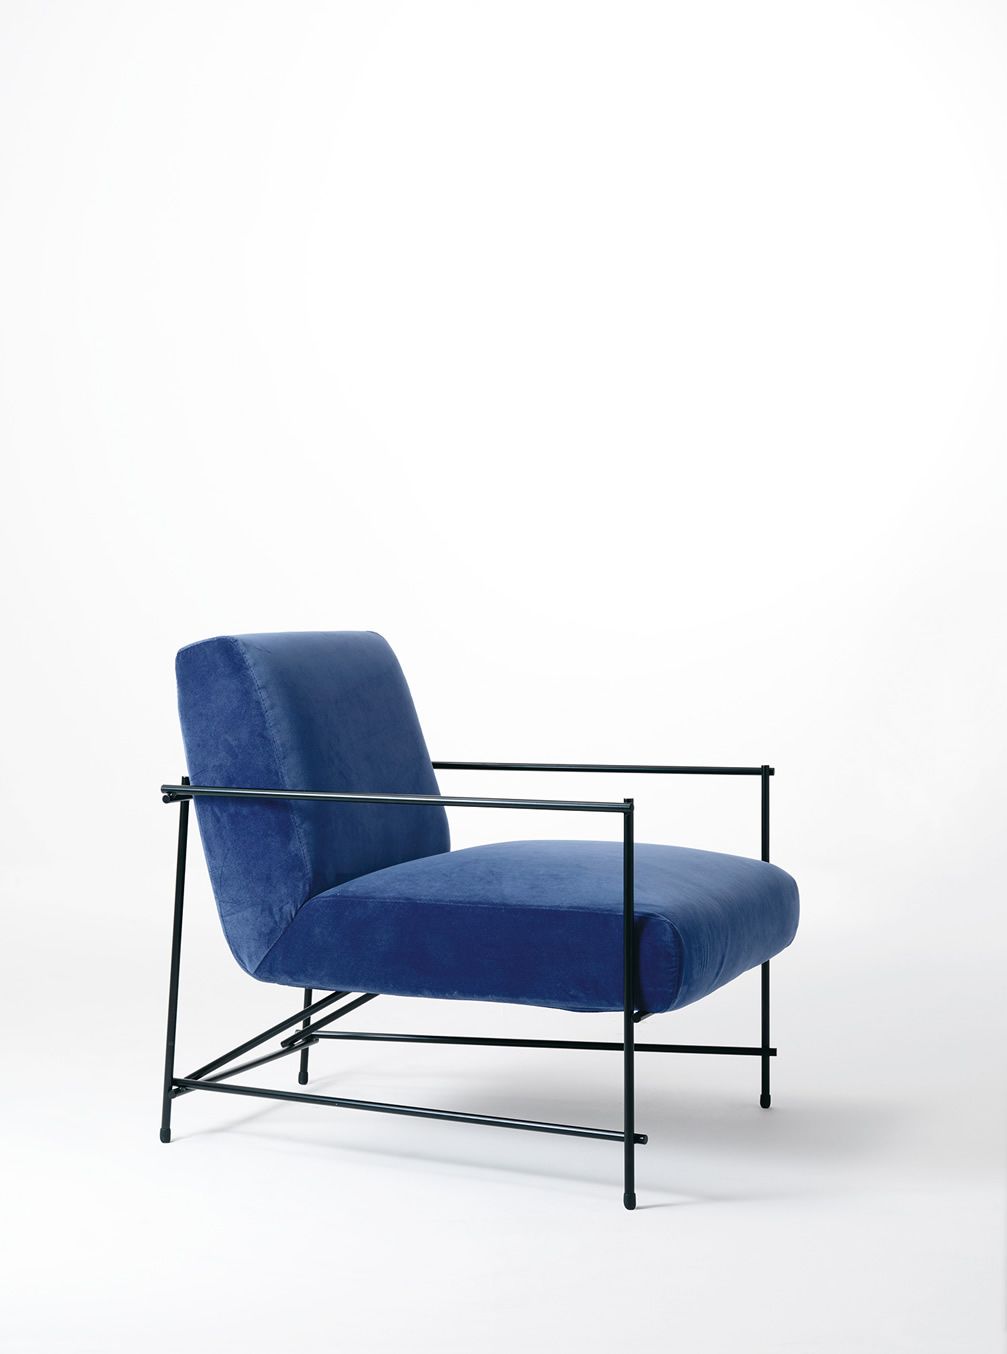 Kyo chair by Ditre Italia